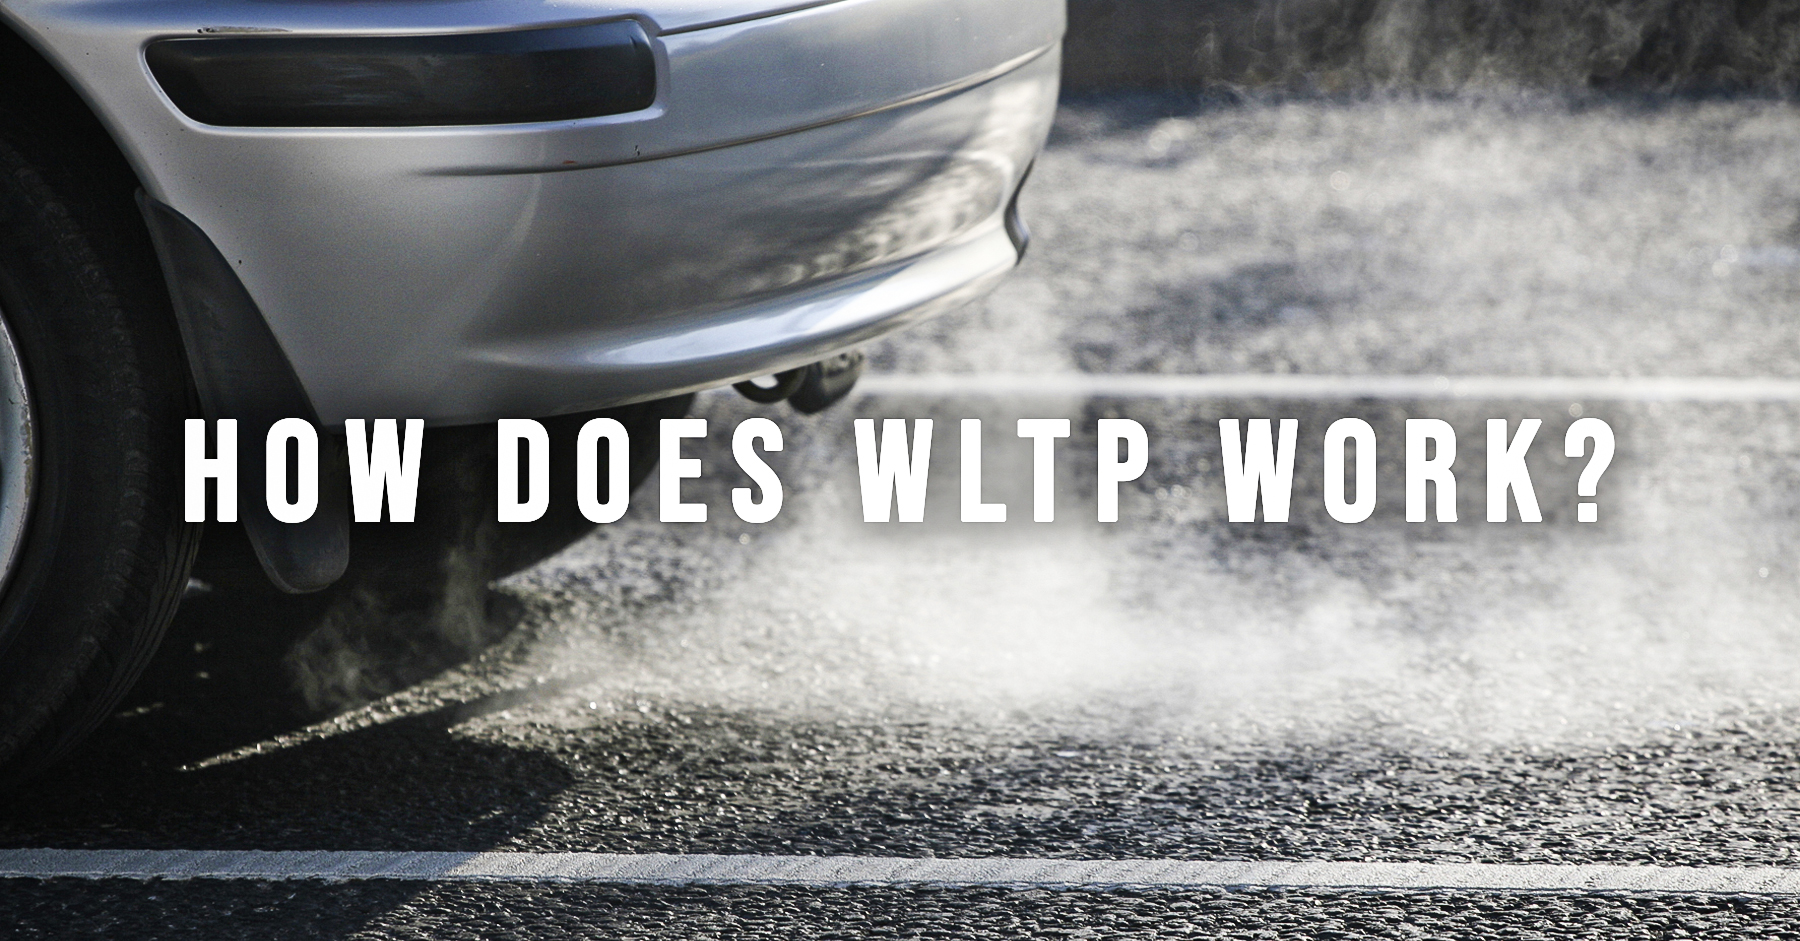 How does WLTP work?